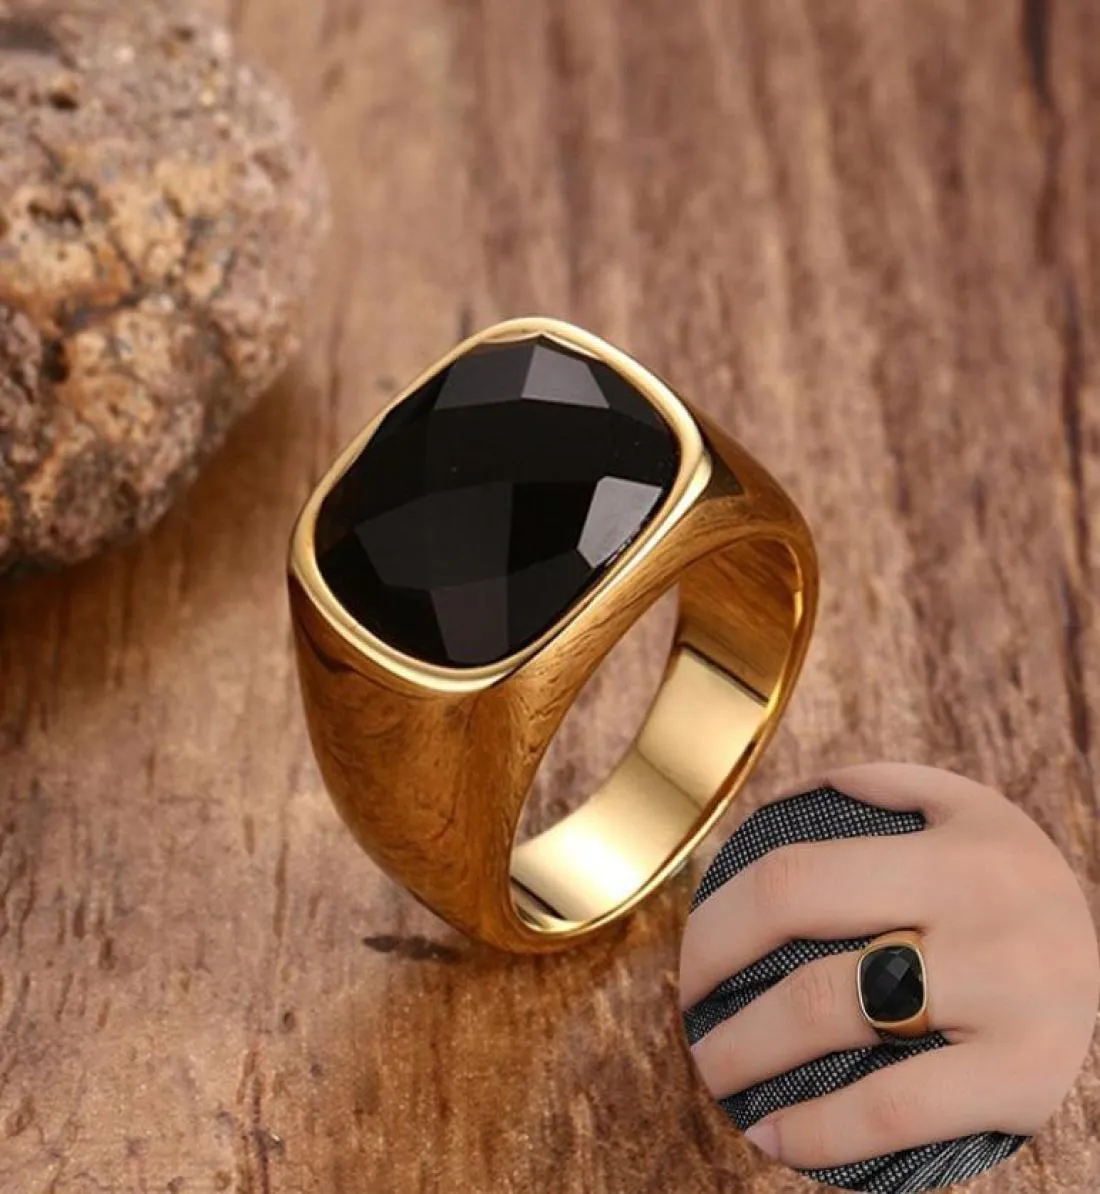 Vintage Black Carnelian Stone Signet Rings for Men Gold Color Stainless Steel Square Engagement Rings Male Jewelry9955176